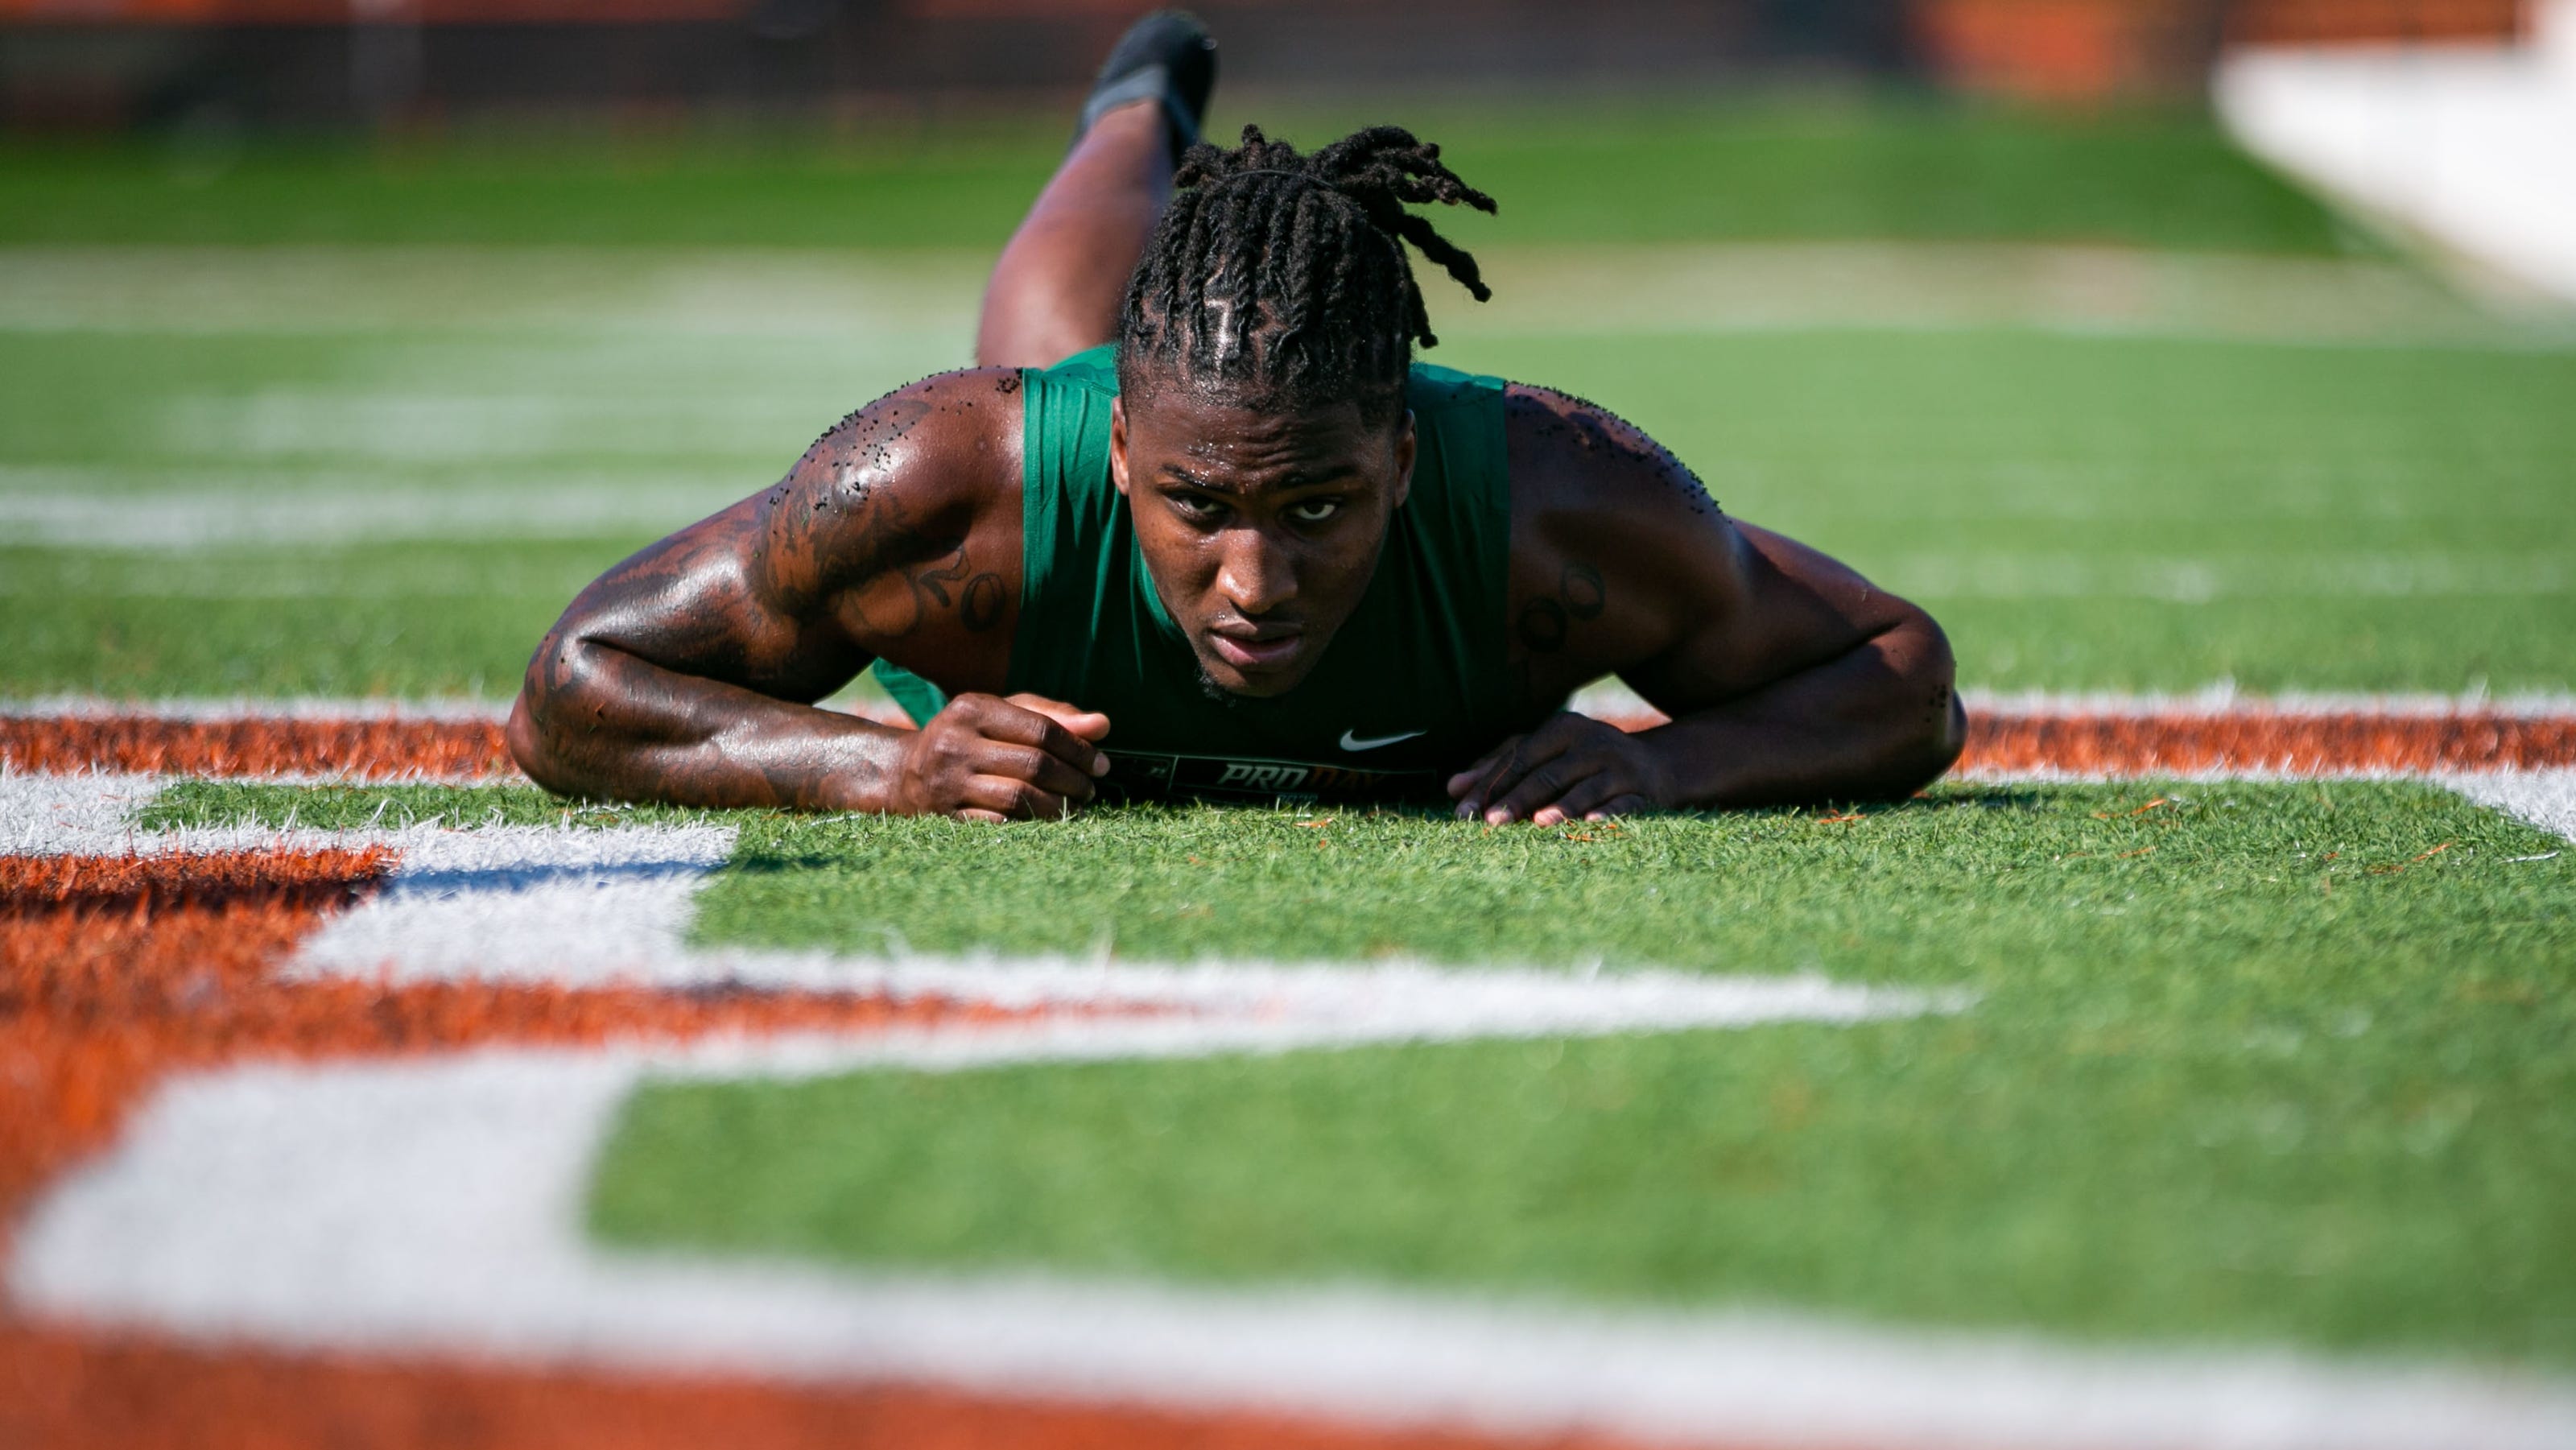 WATCH Highlights from FAMU football's Pro Day 2023 at Bragg Memorial